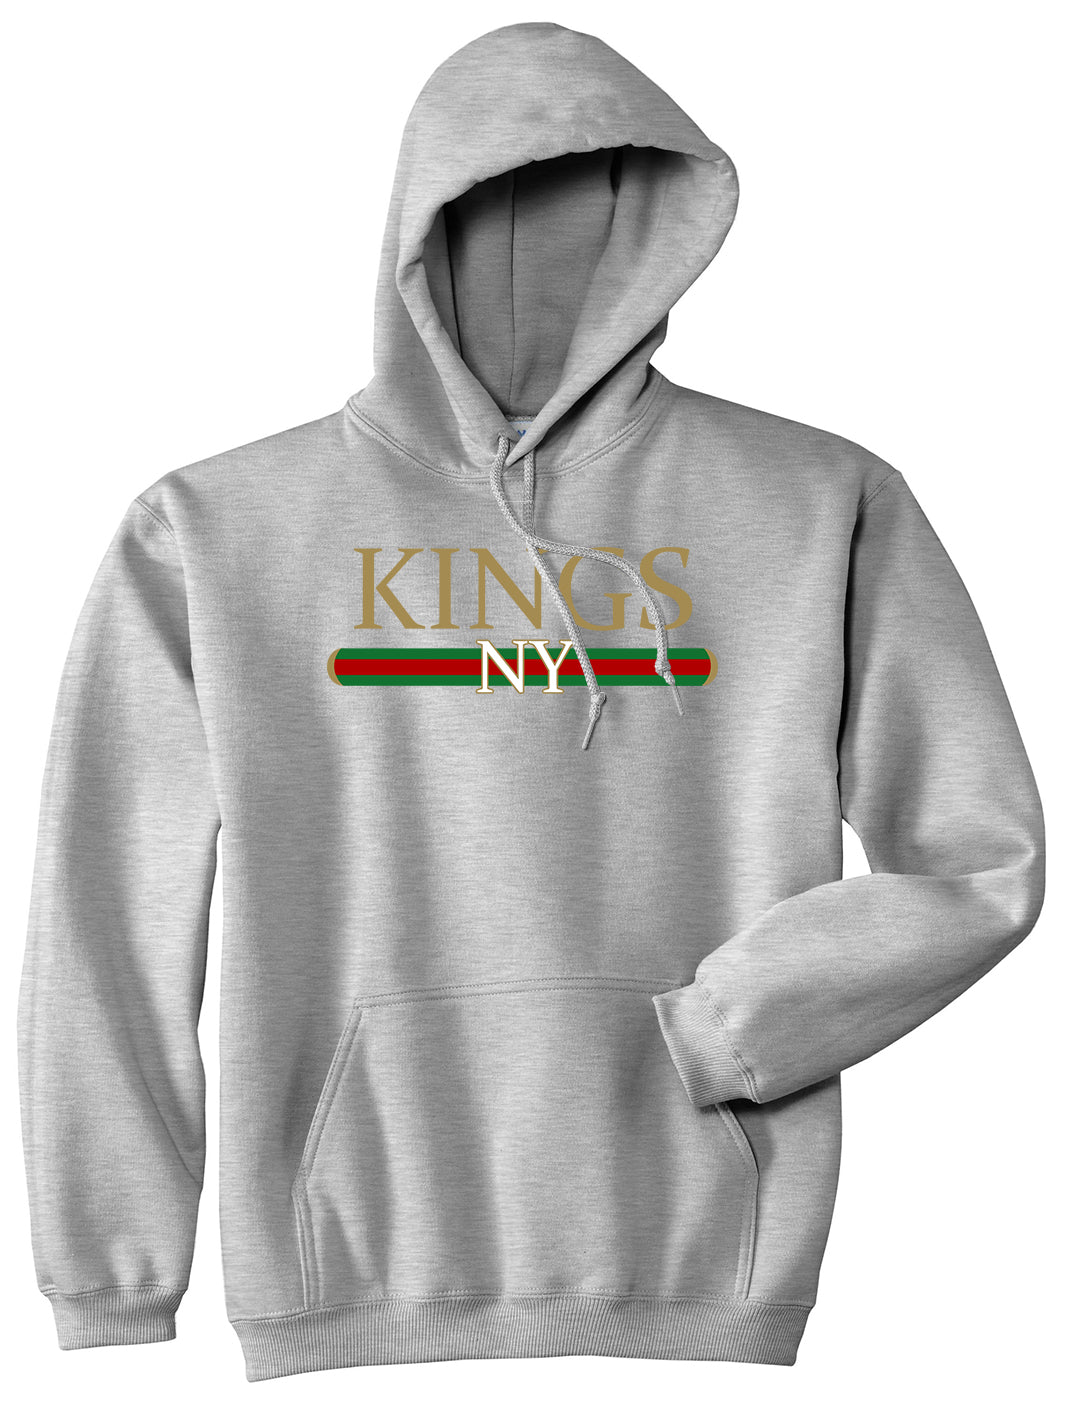 Vintage High Fashion Pullover Hoodie in Grey